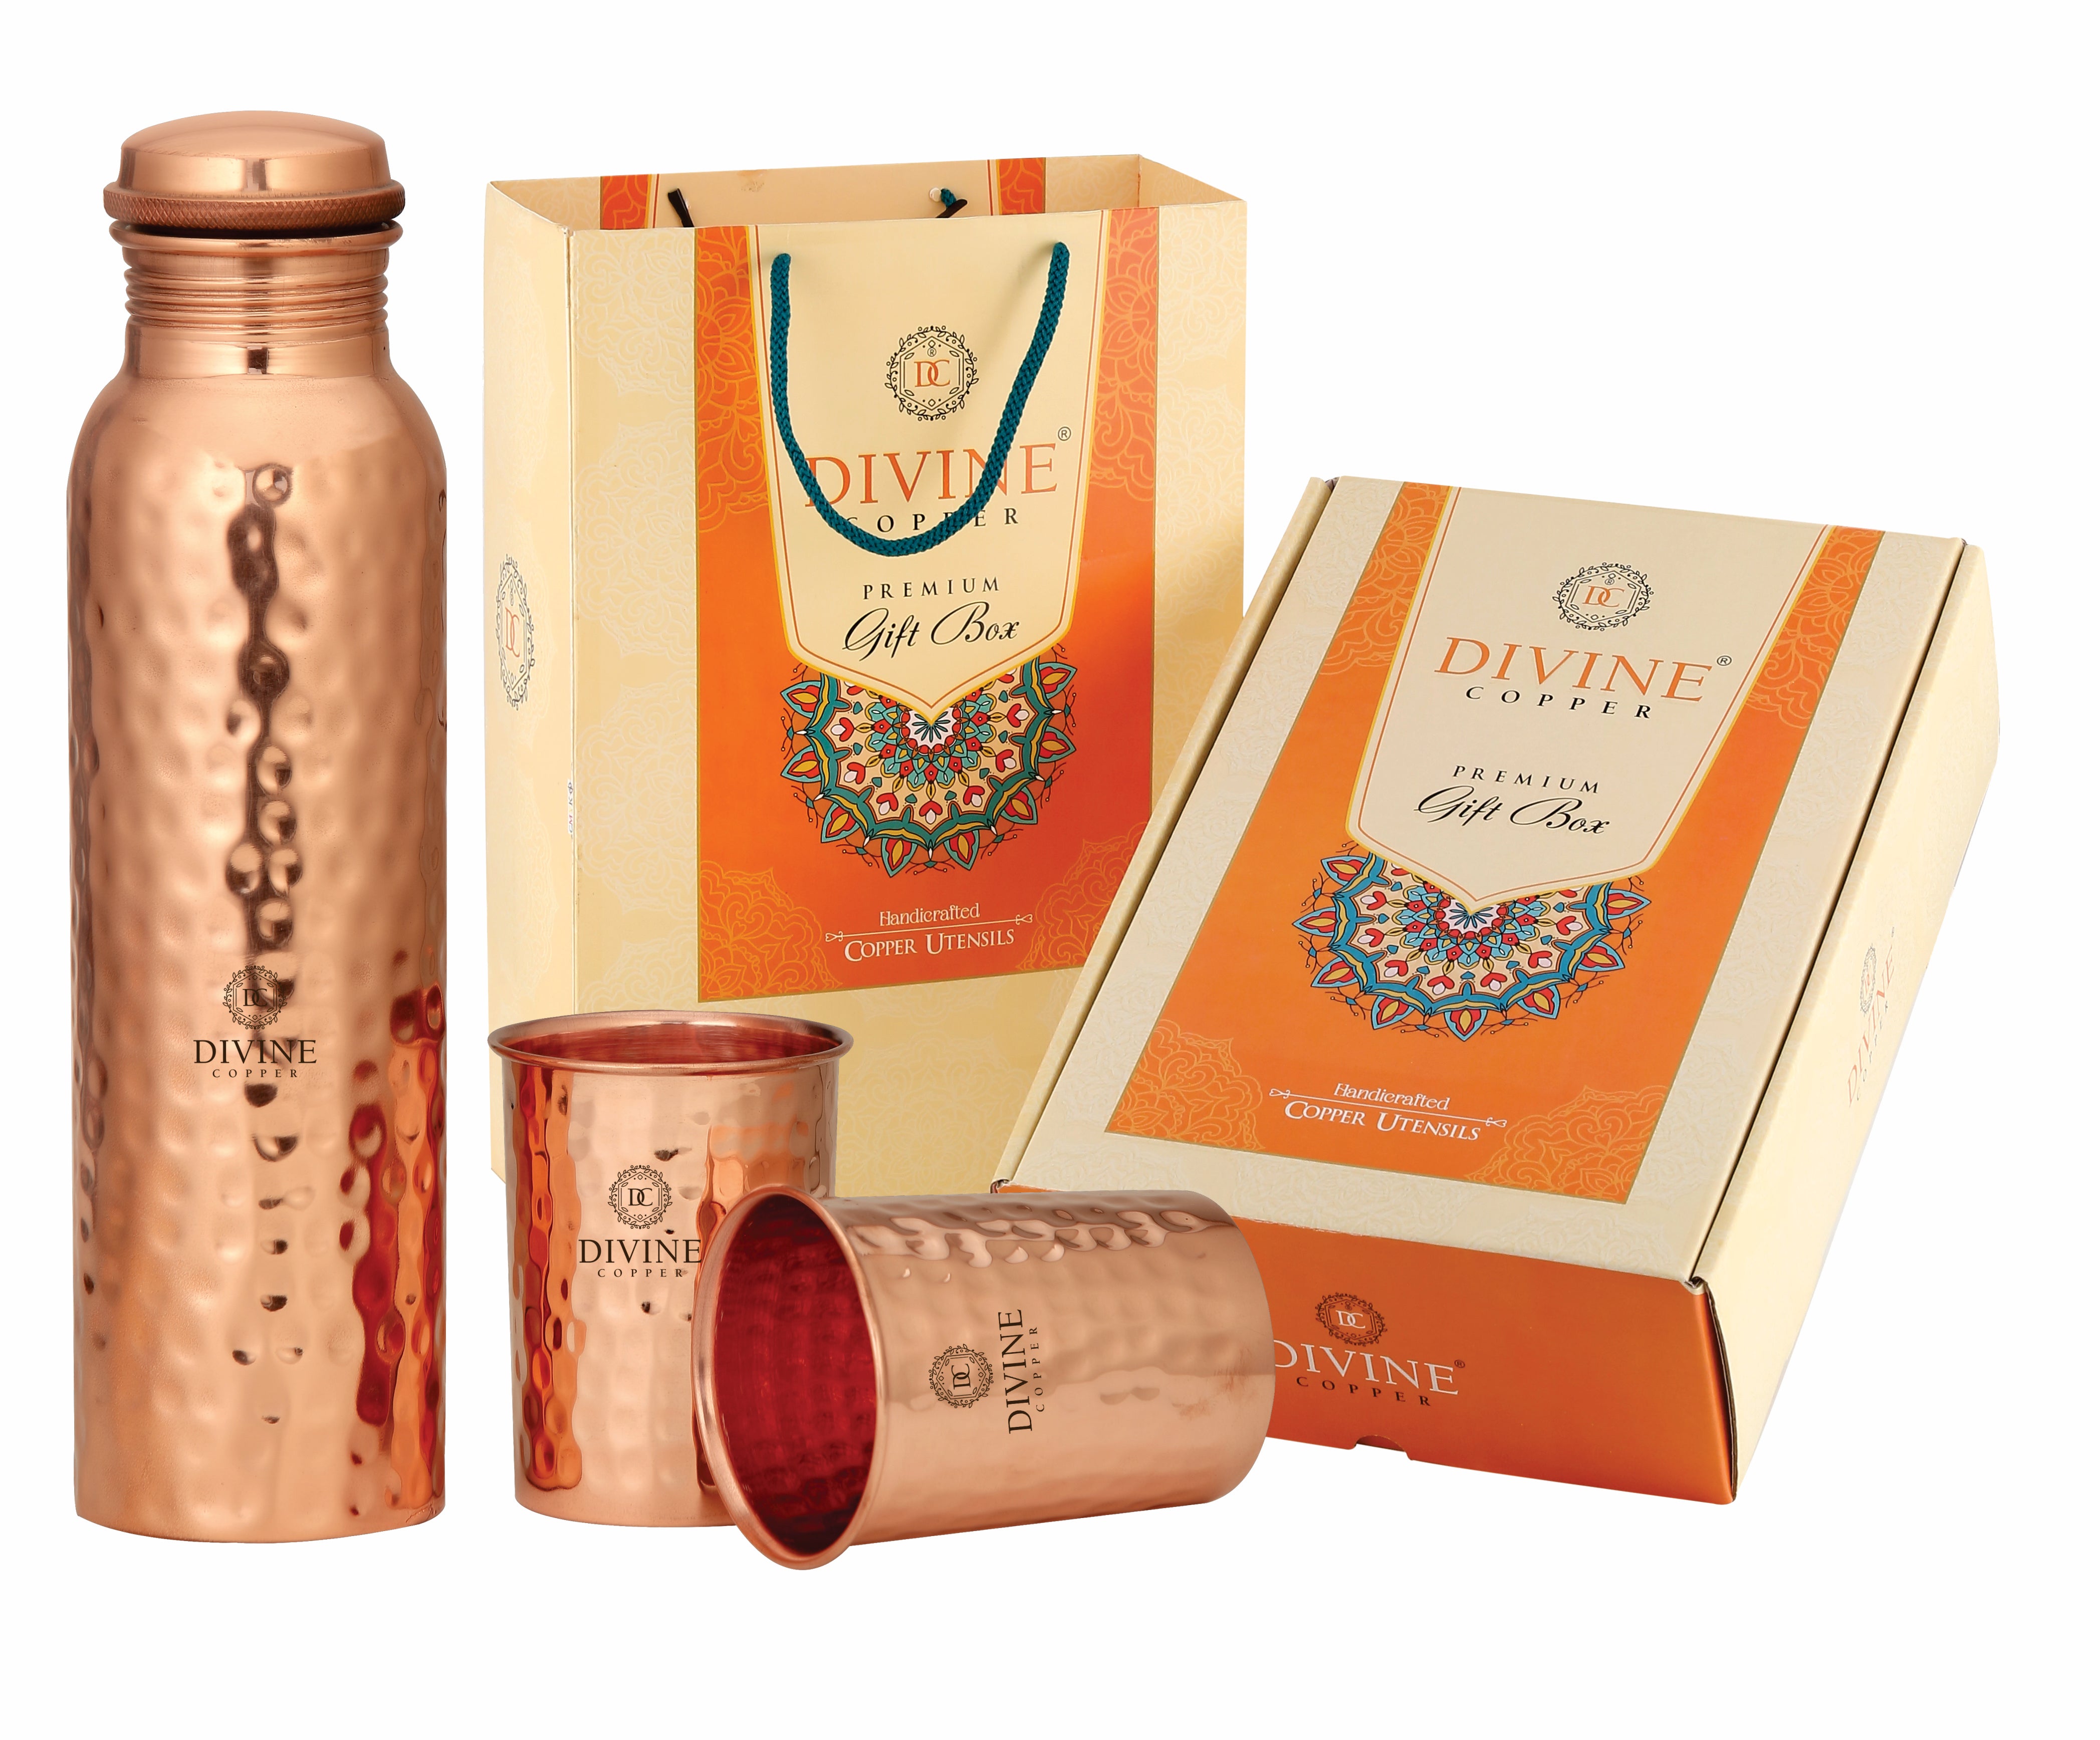 Pie 950ml hmd Pure Copper bottle with 2 Glass gift pack